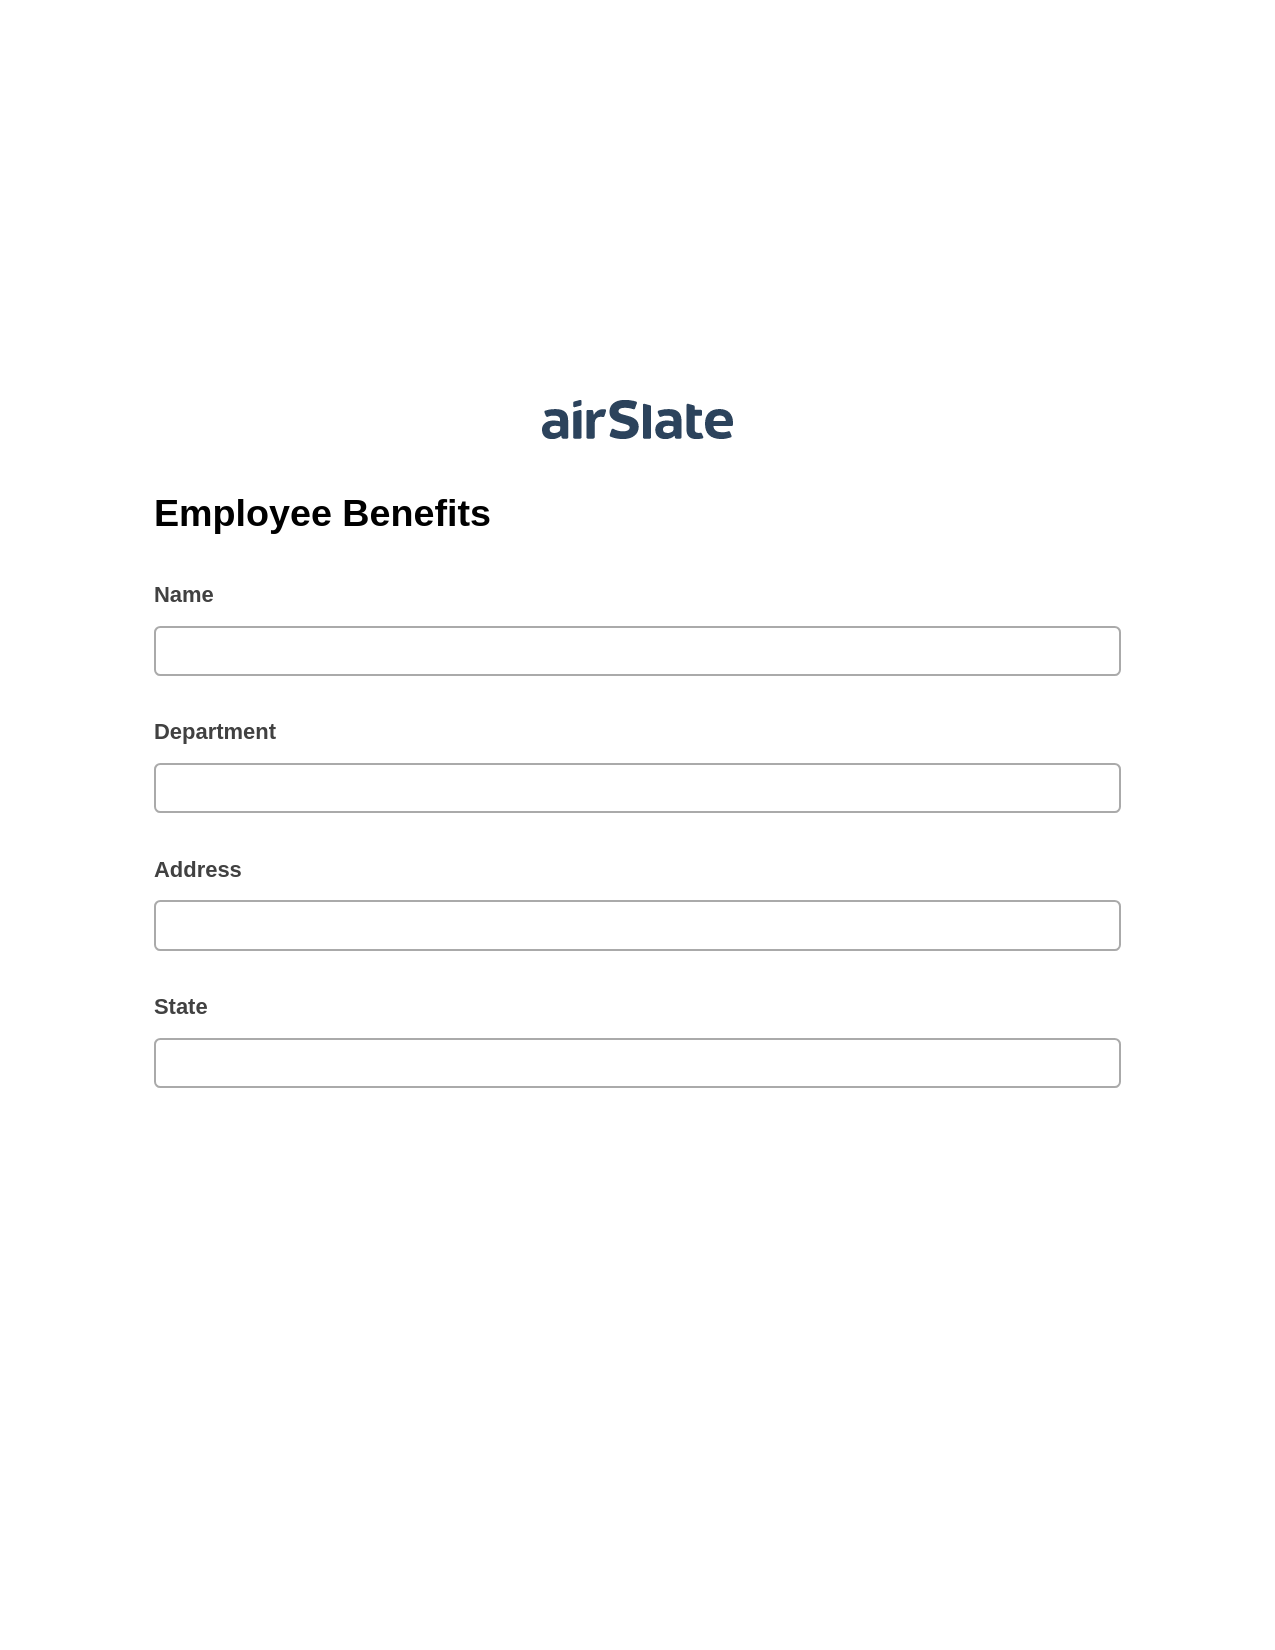 Employee Benefits Pre-fill Dropdown from Airtable, Document Hide Bot, Export to Formstack Documents Bot